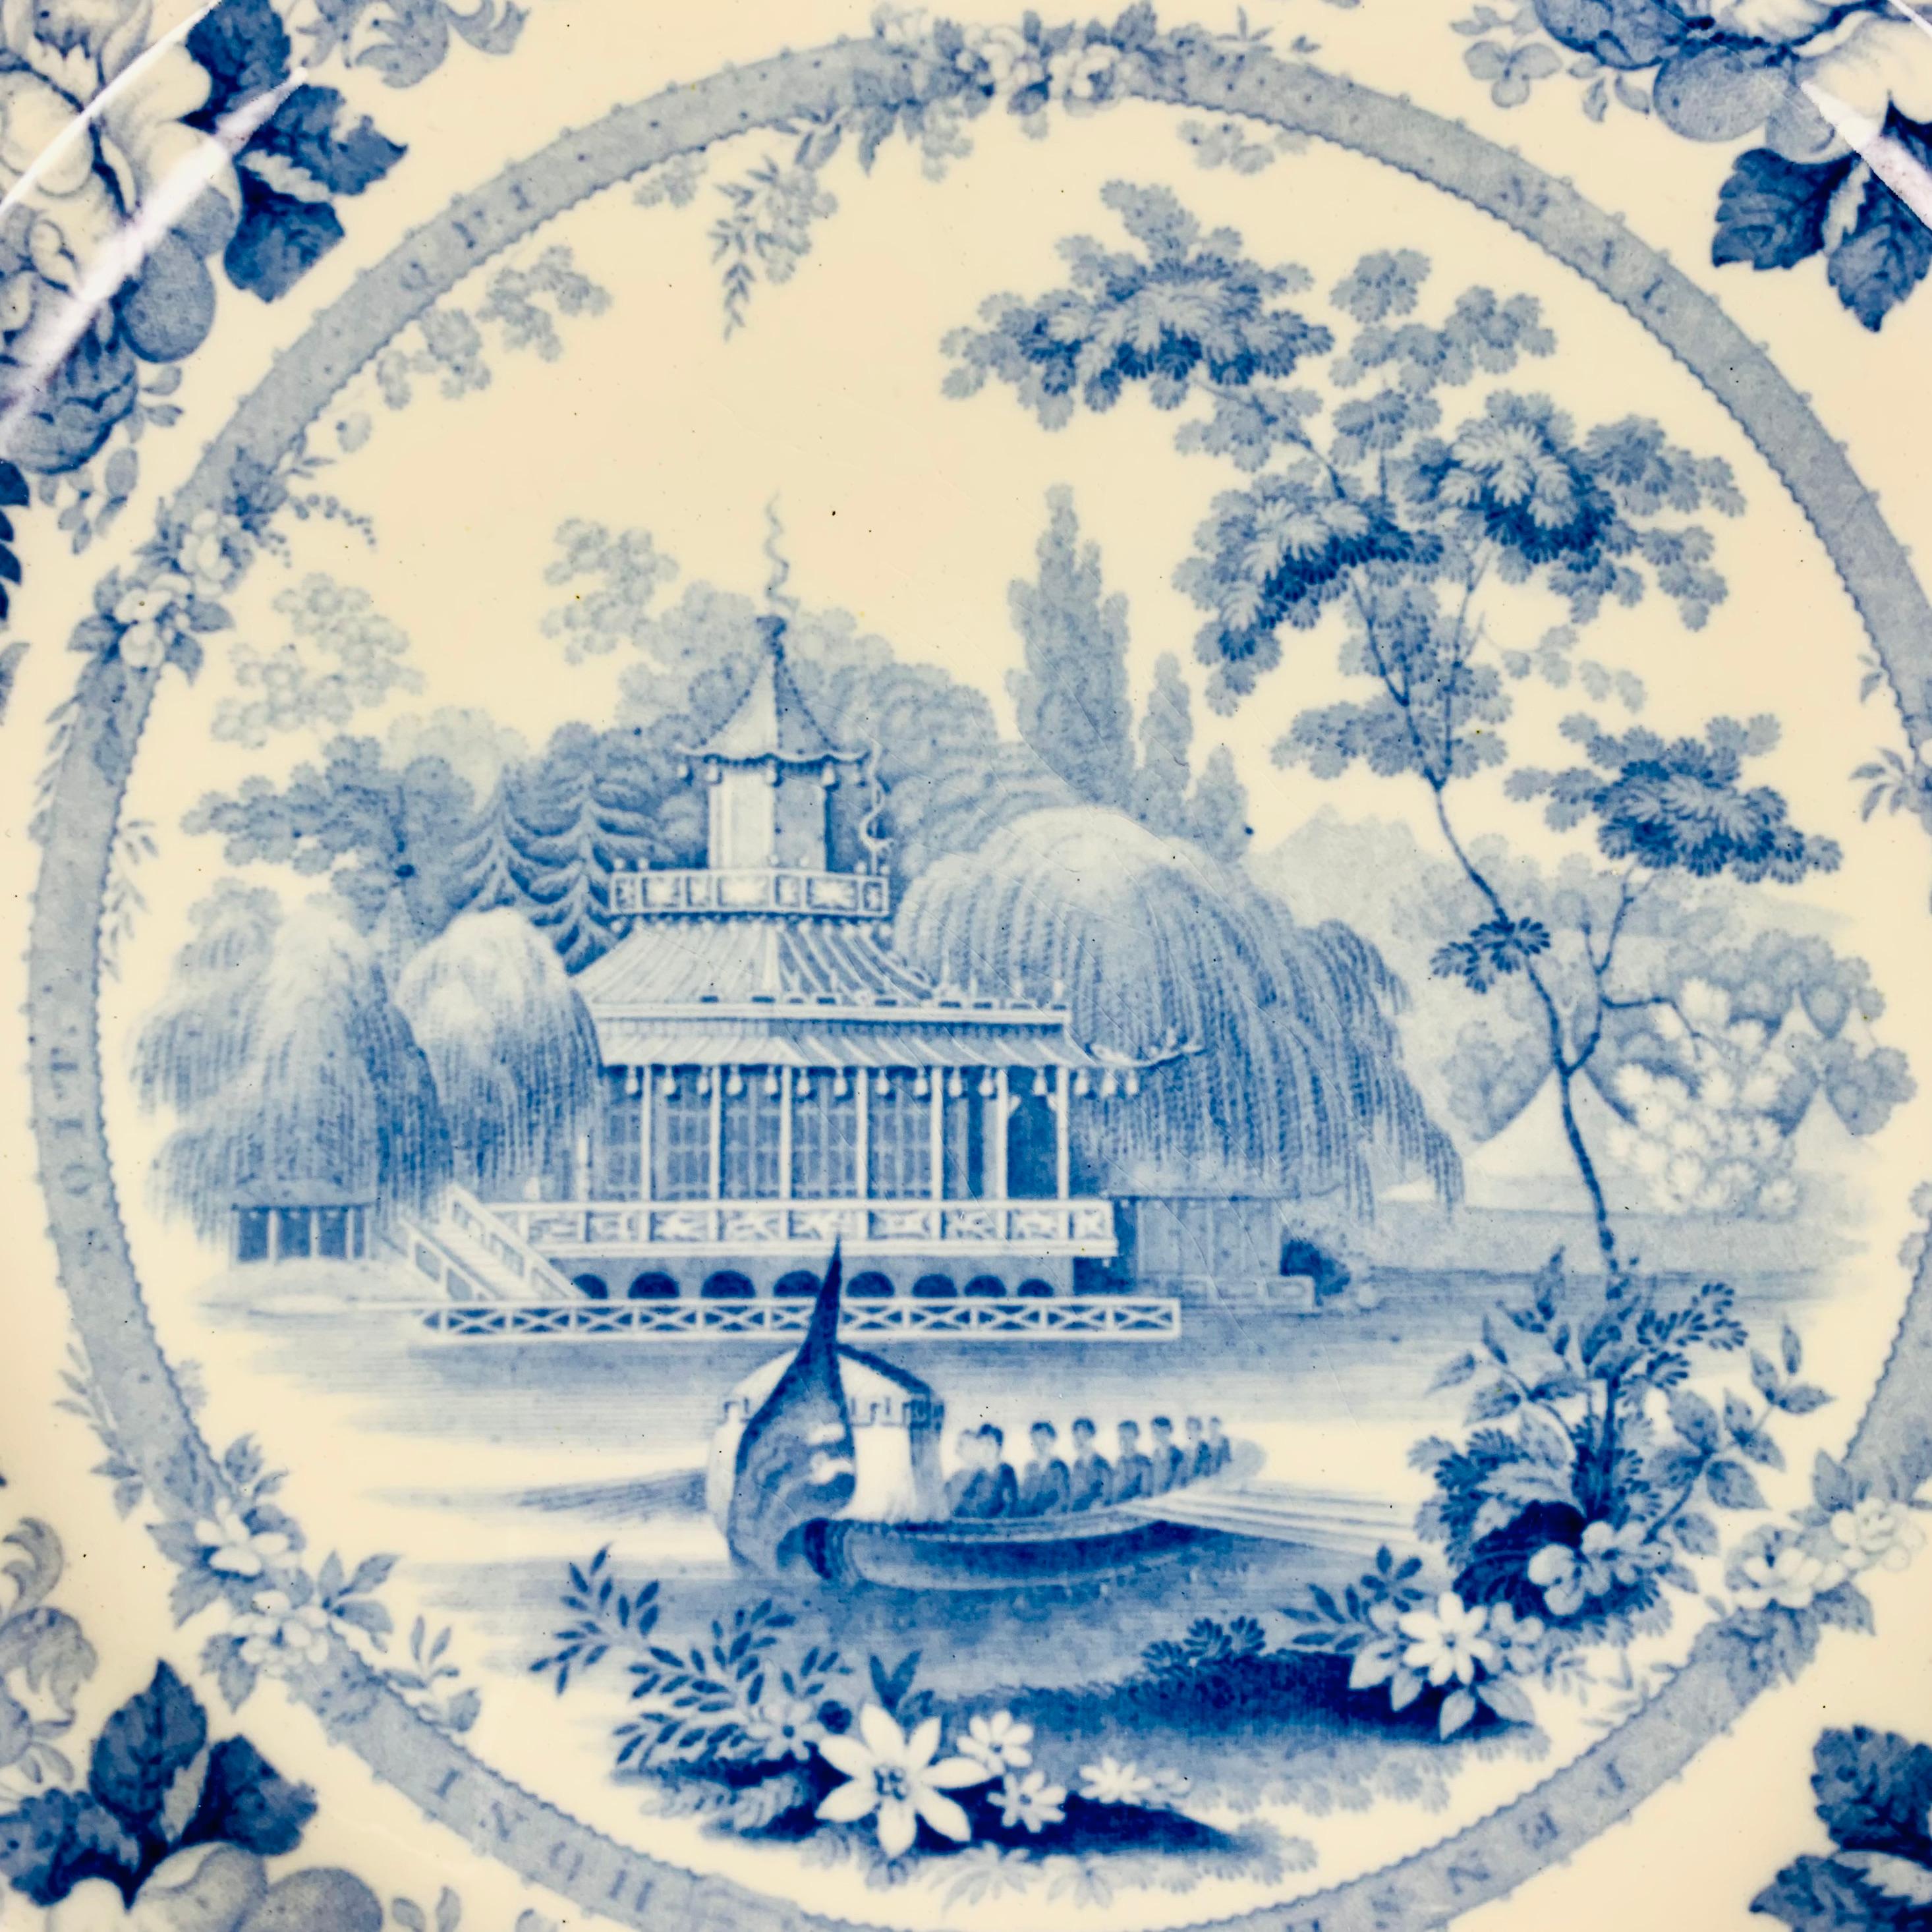 A set of six British Romantic themed transfer printed dinner plates in the pattern known as ‘Royal Sketches.’, circa mid-19th century, Staffordshire, England.

The center image shows the Fishing Temple at Virginia Water. The fishing temple was